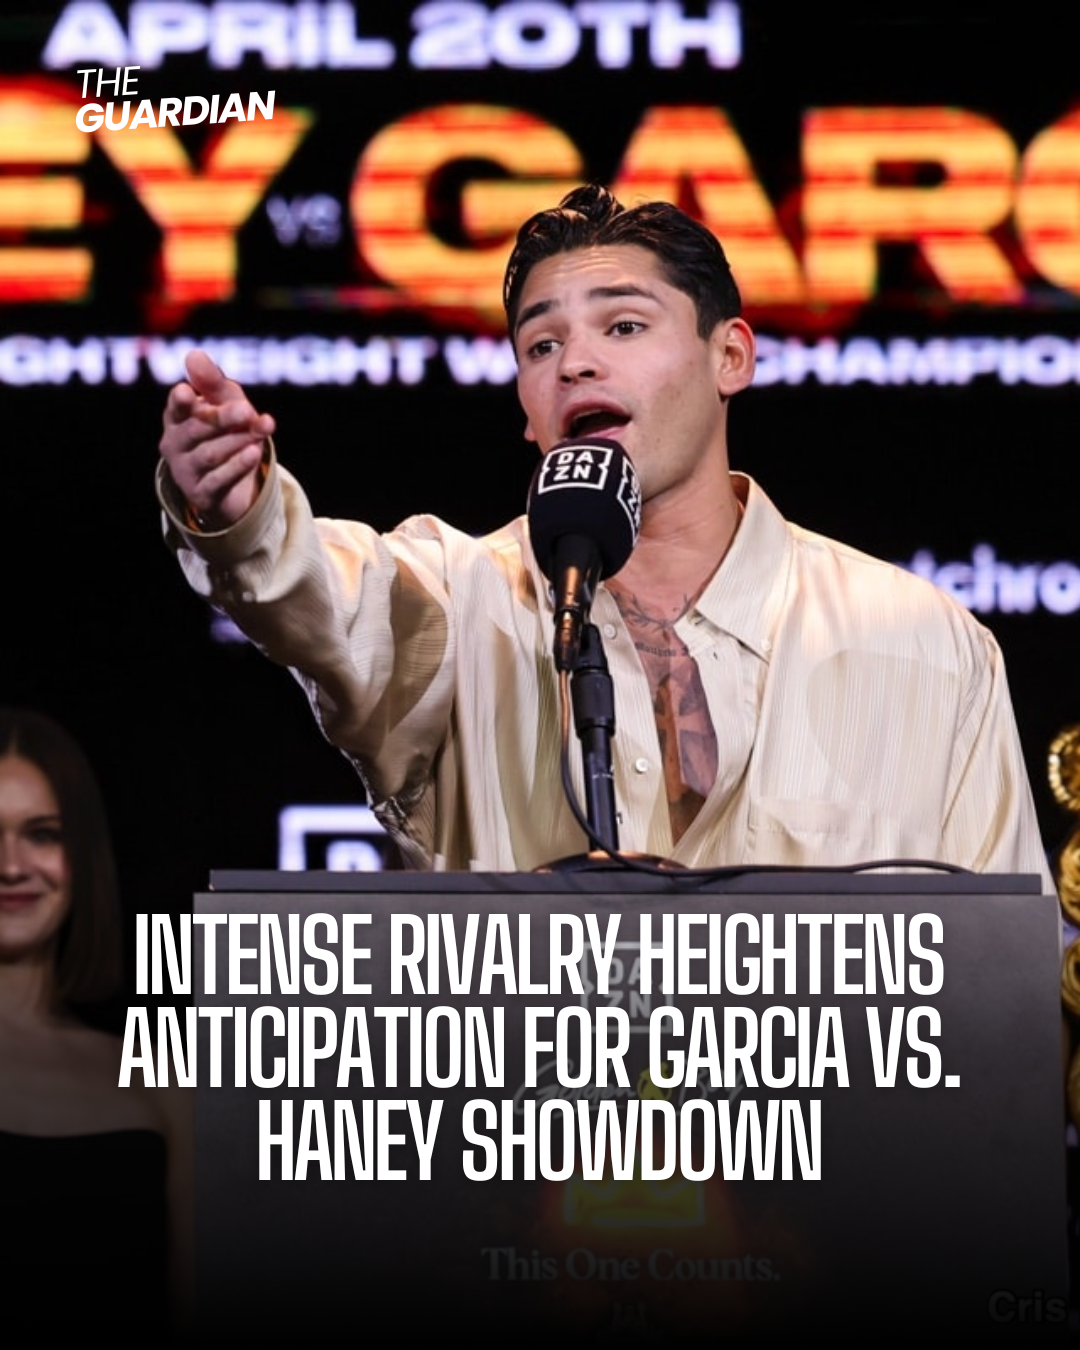 As the highly anticipated WBC super lightweight title battle between Ryan Garcia and Devin Haney comes closer,